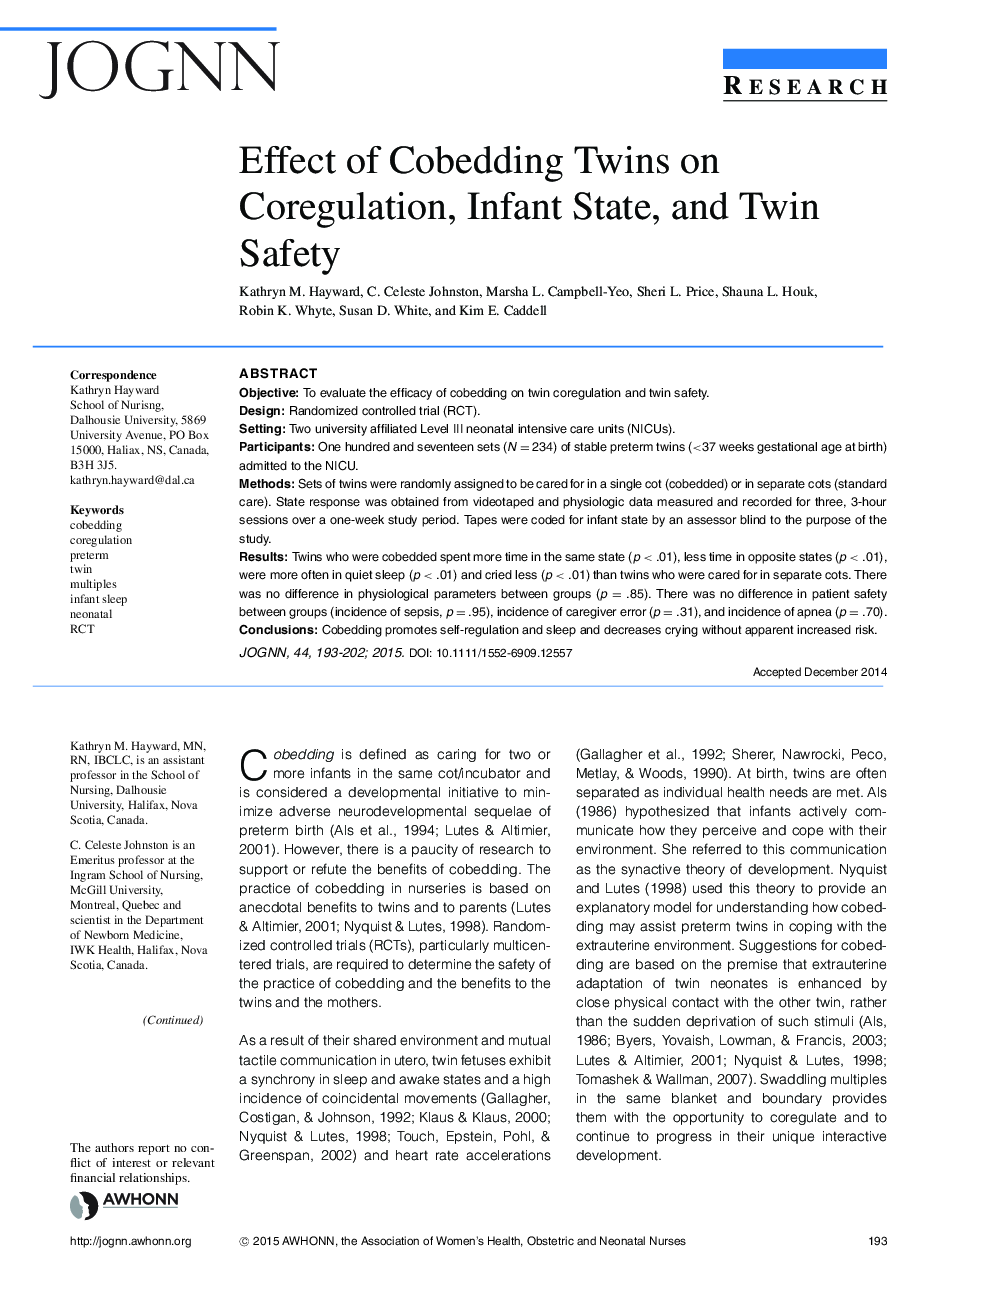 Effect of Cobedding Twins on Coregulation, Infant State, and Twin Safety